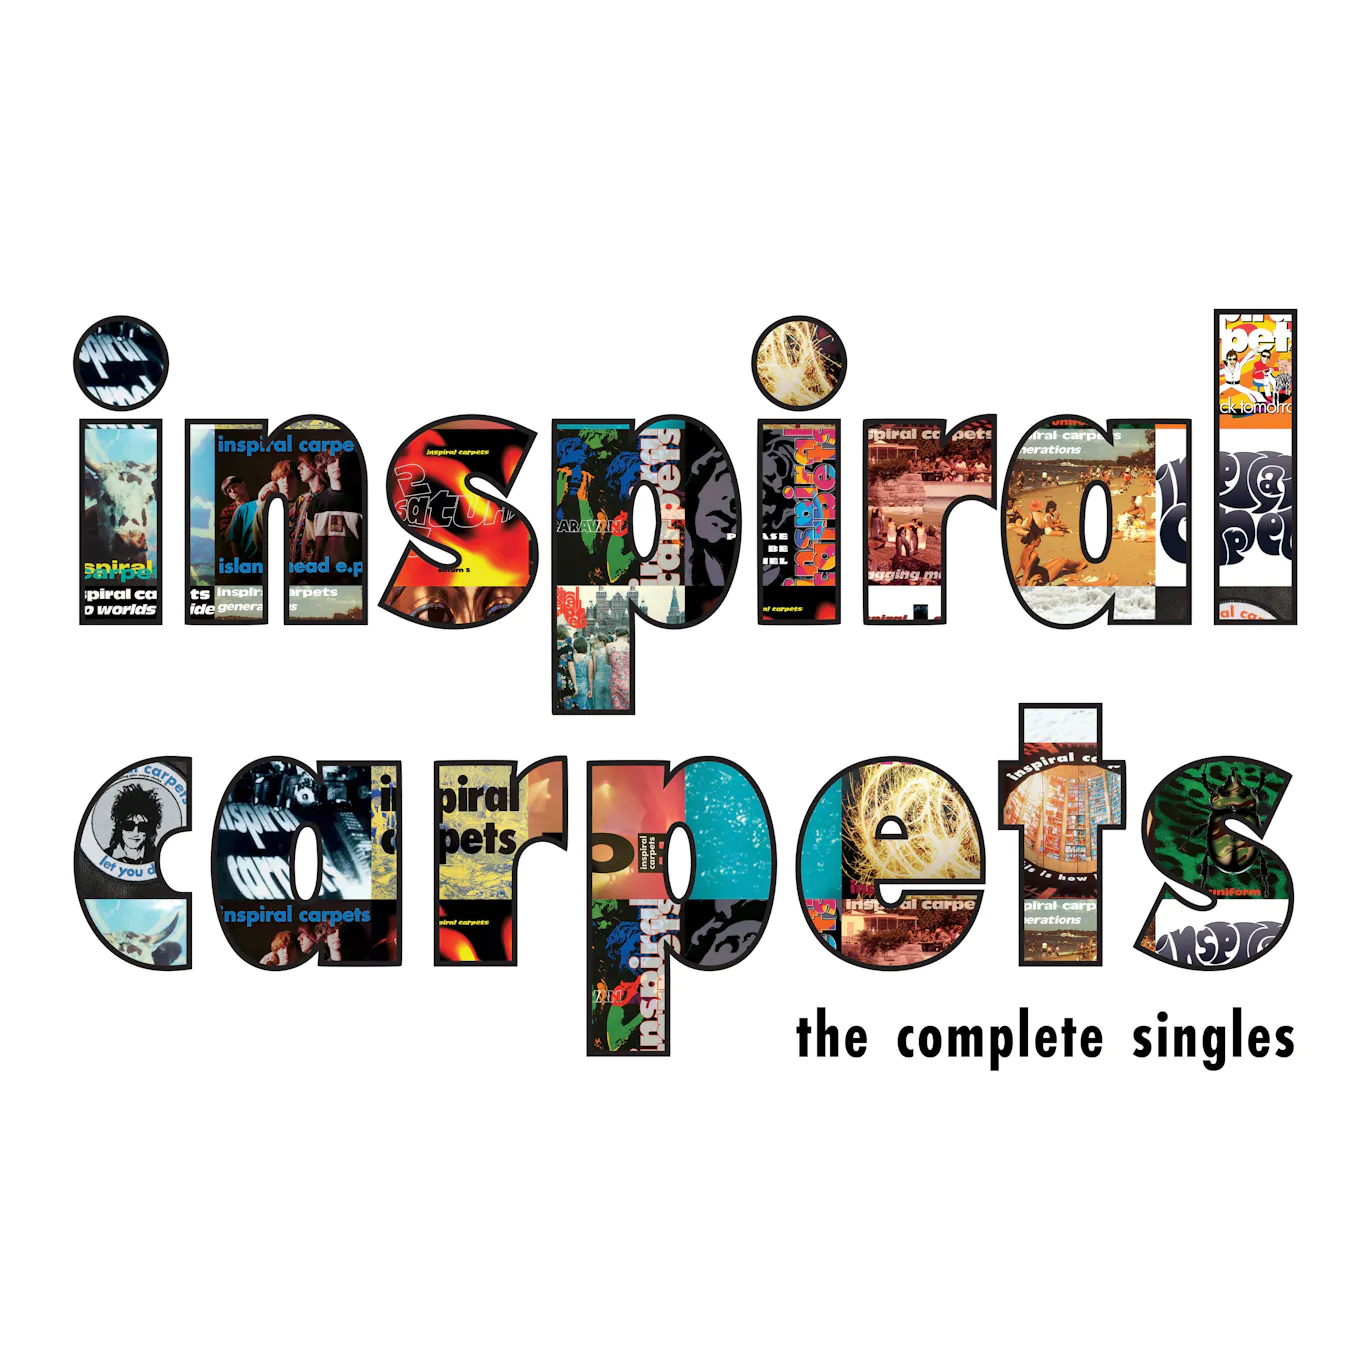 ALBUM REVIEW: Inspiral Carpets – The Complete Singles